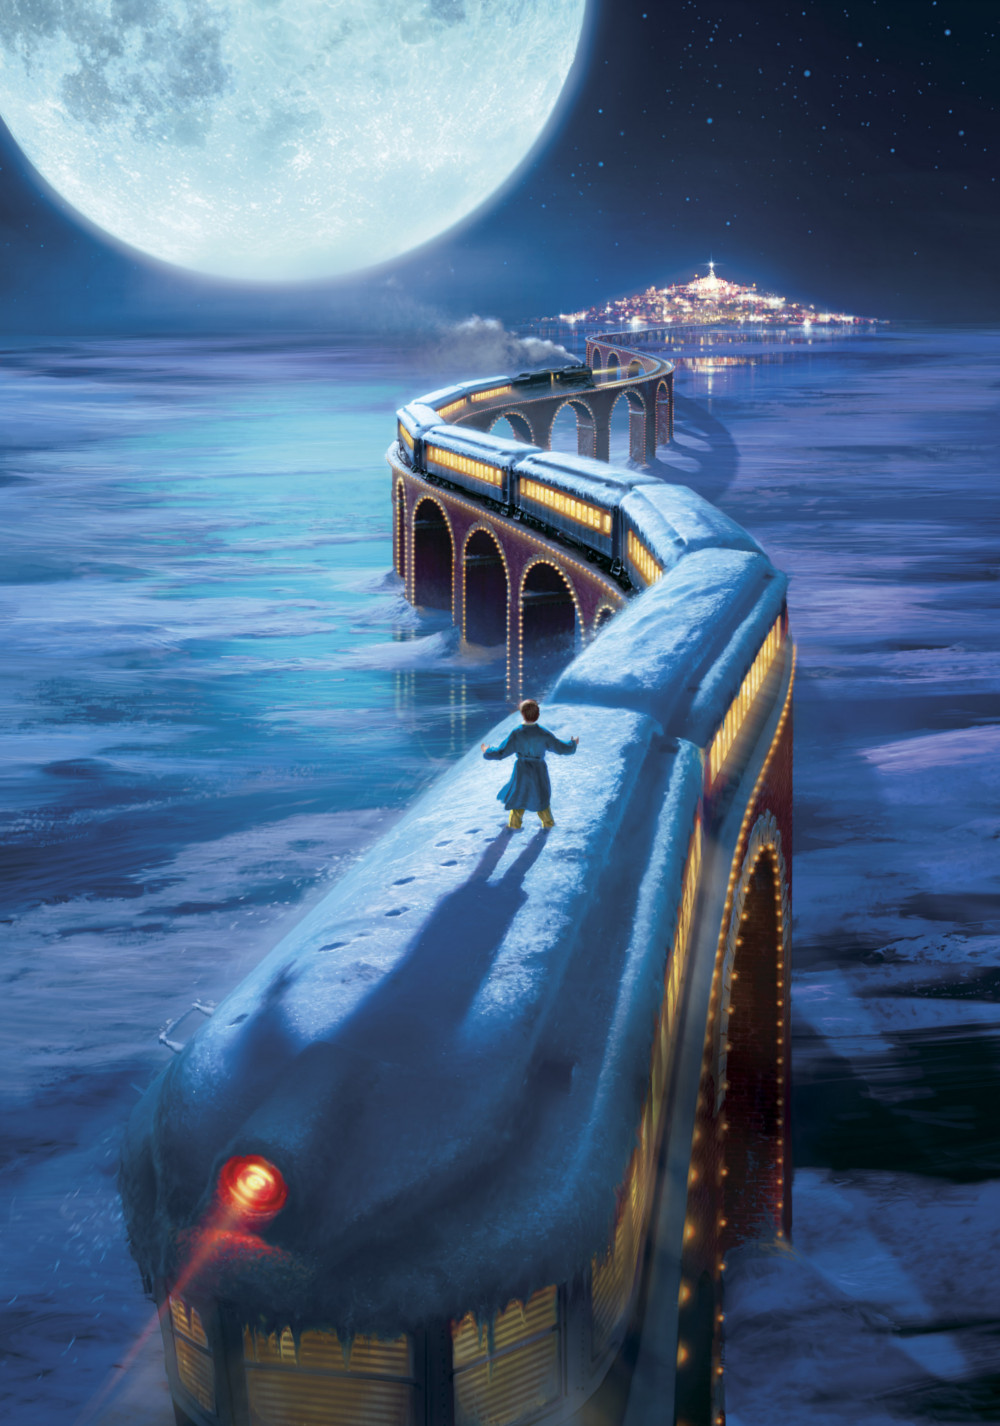 The Polar Express Movie Poster - ID: 138732 - Image Abyss